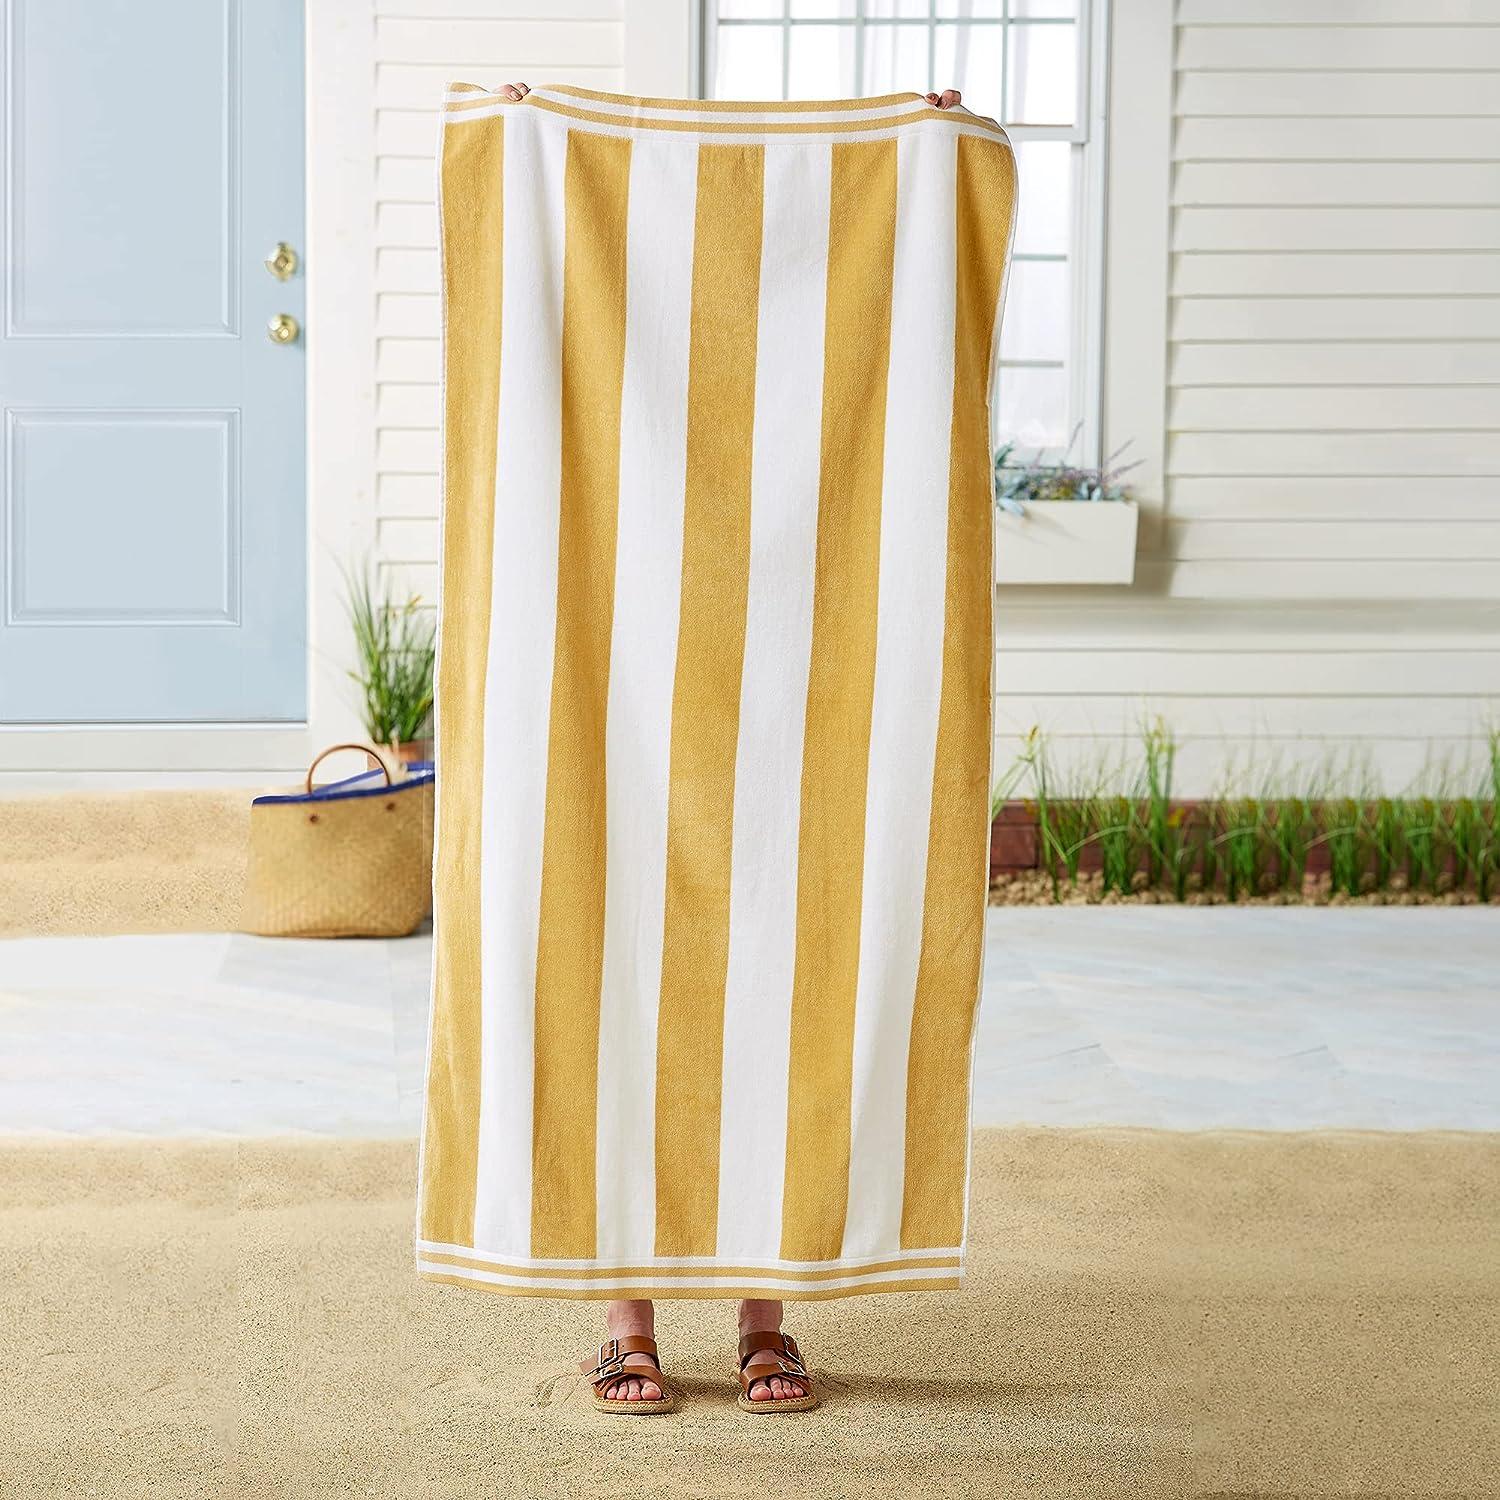 Striped Cabana Beach Towel  Edgartown Collection by Great Bay